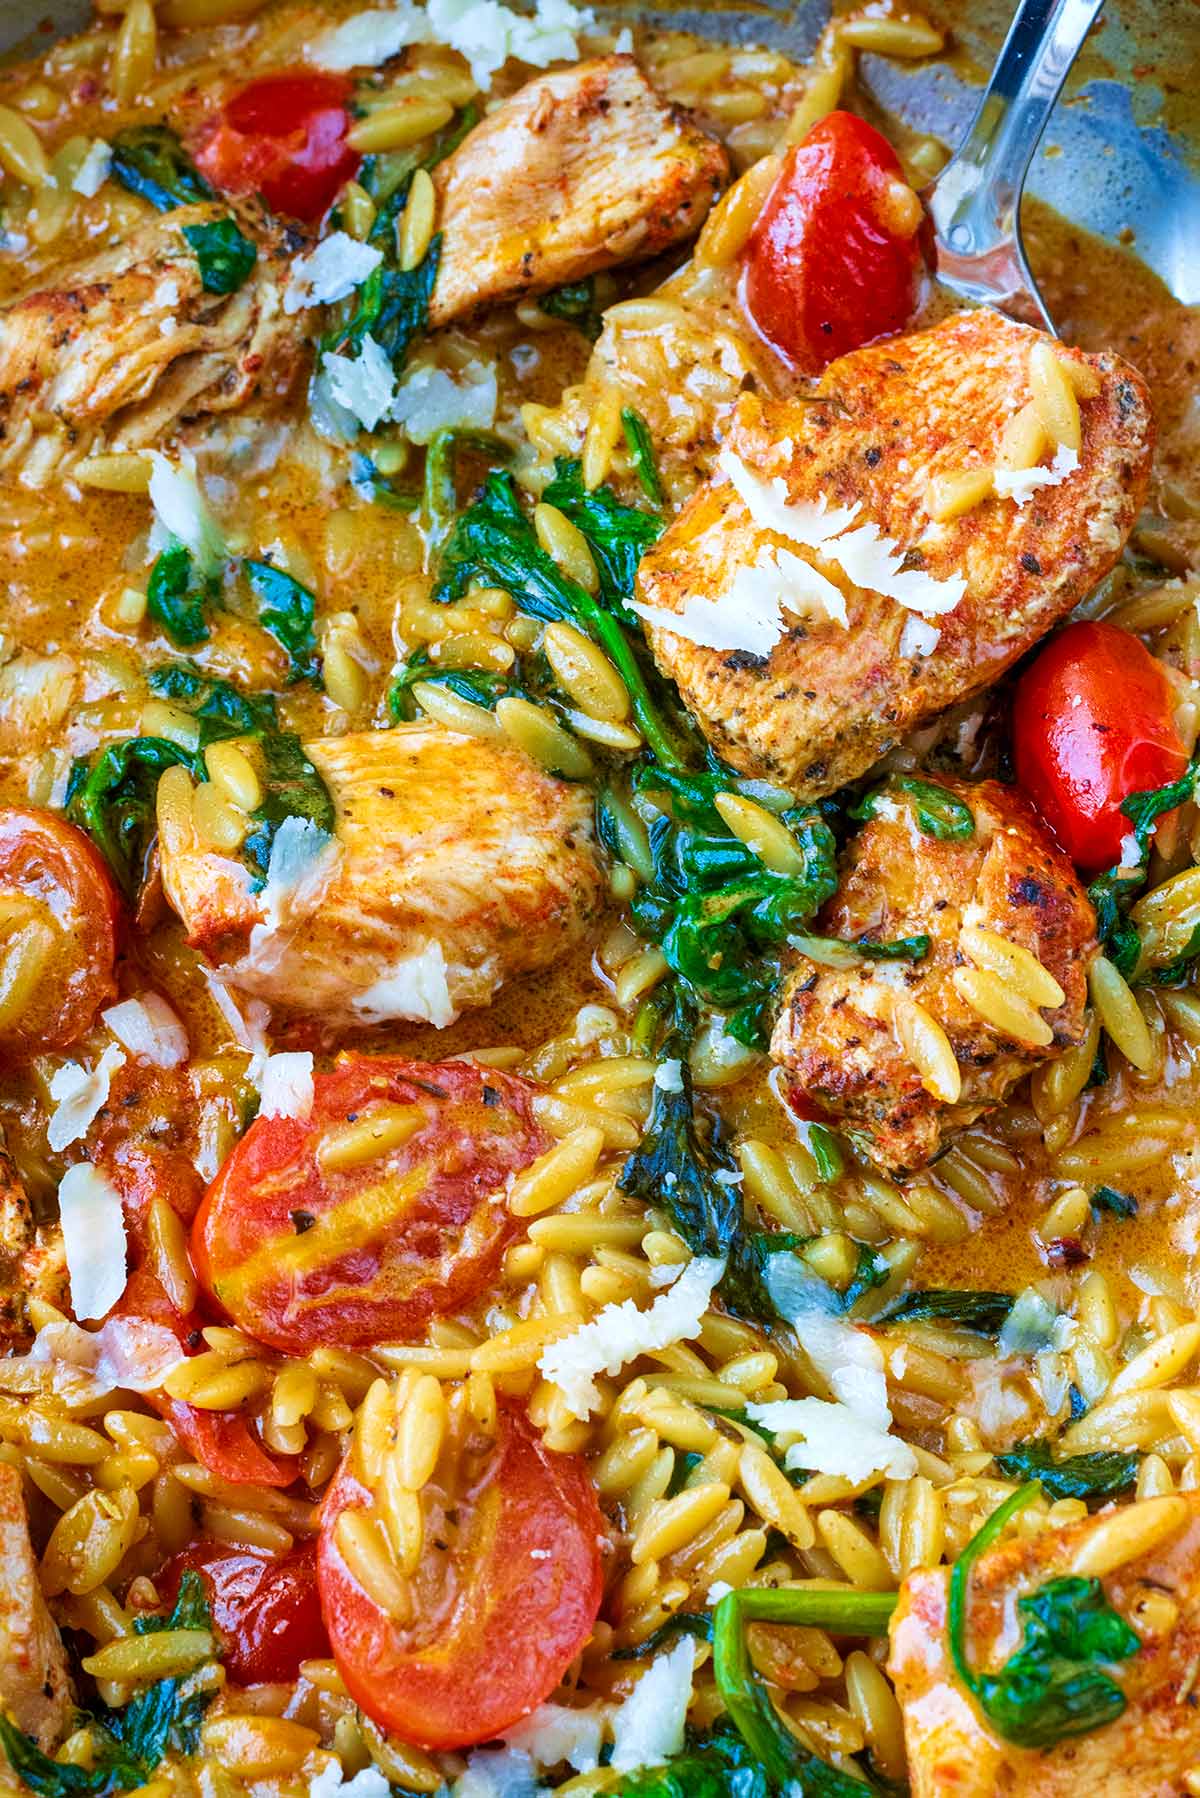 Chunks of chicken and cooked orzo in a creamy sauce.